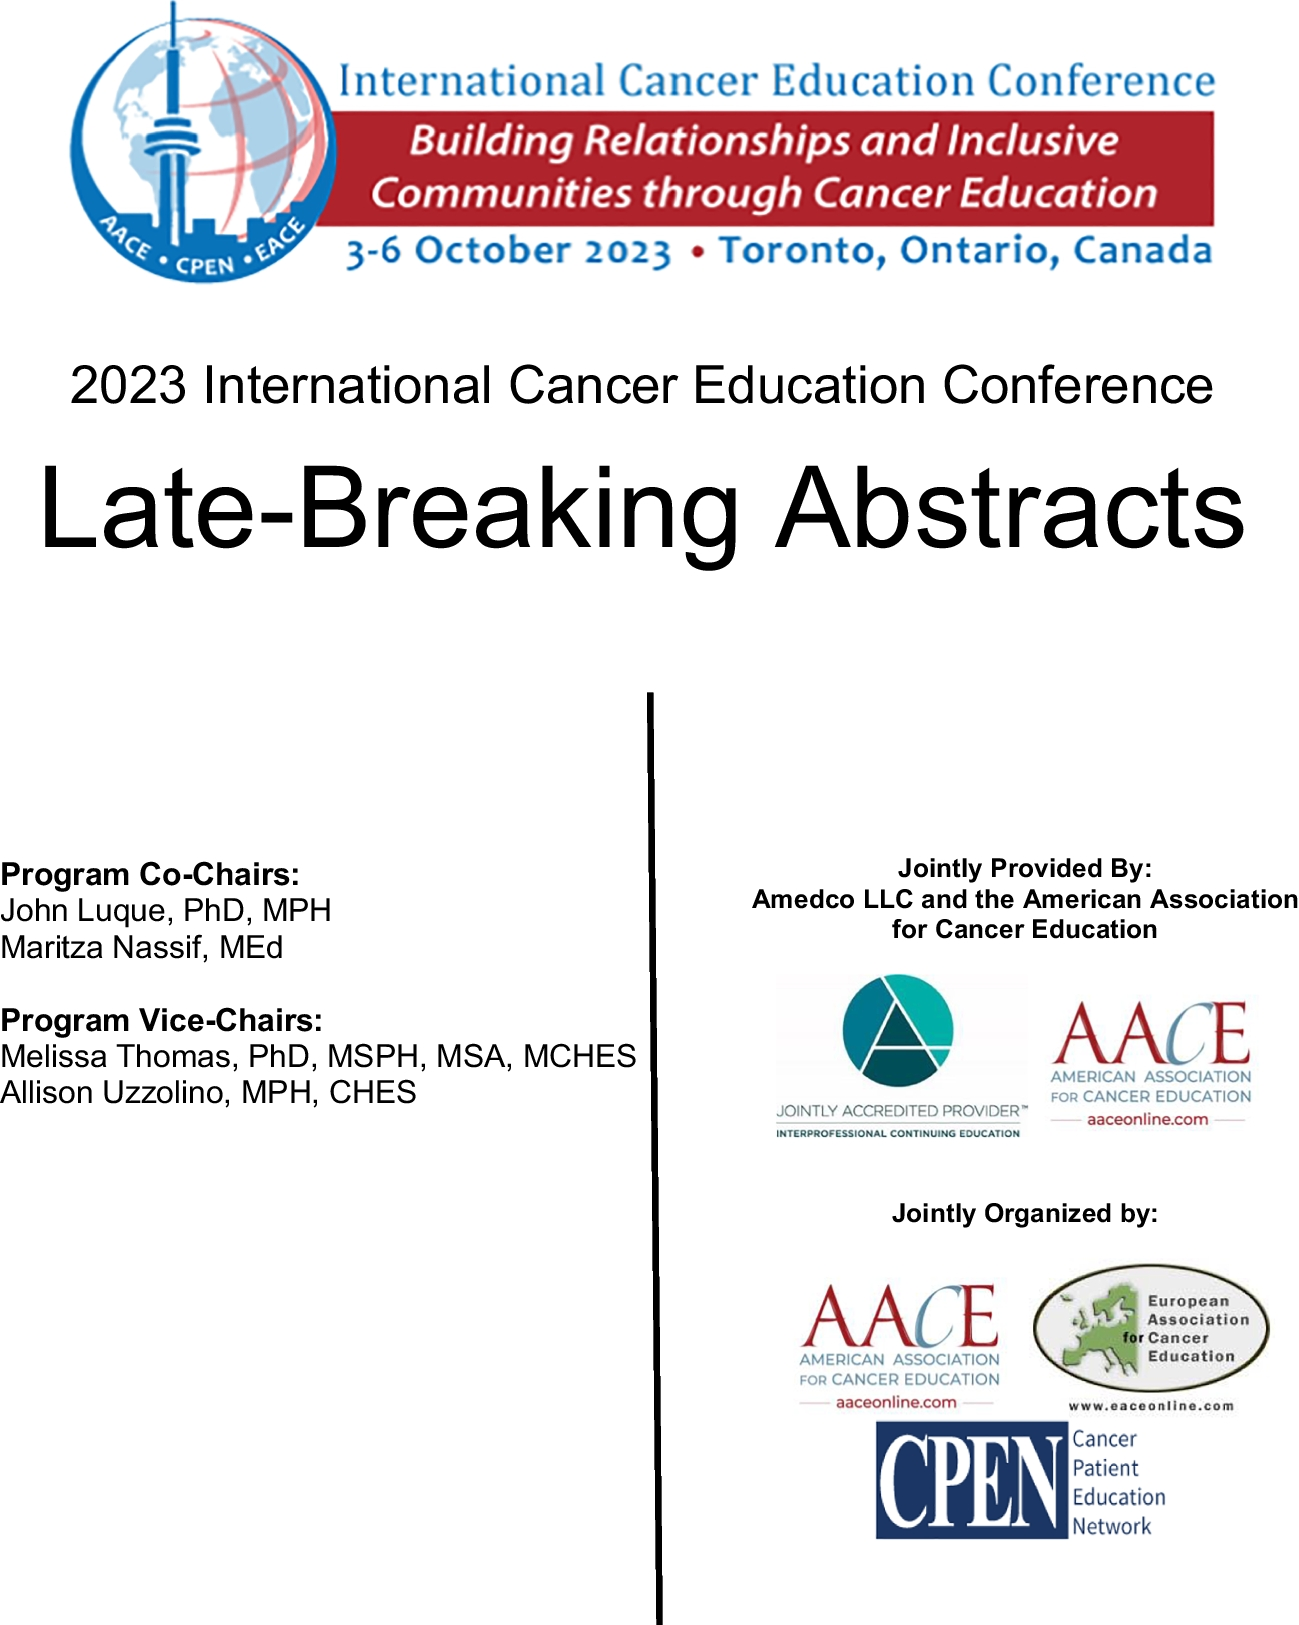 2023 International Cancer Education Conference Late-Breaking Abstracts